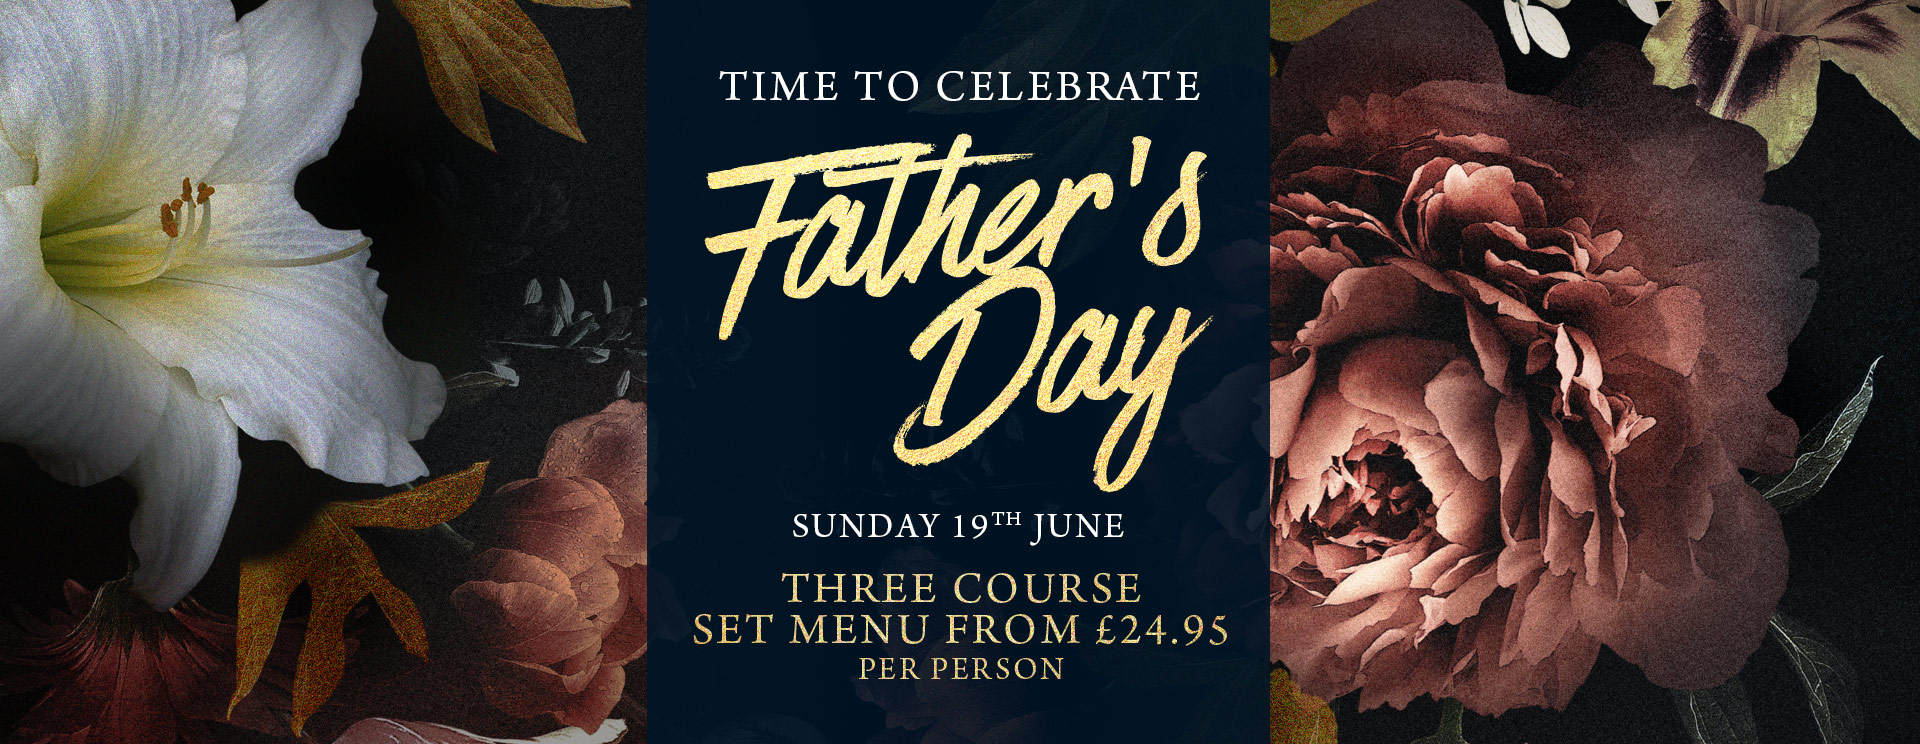 Fathers Day at The Rose & Crown